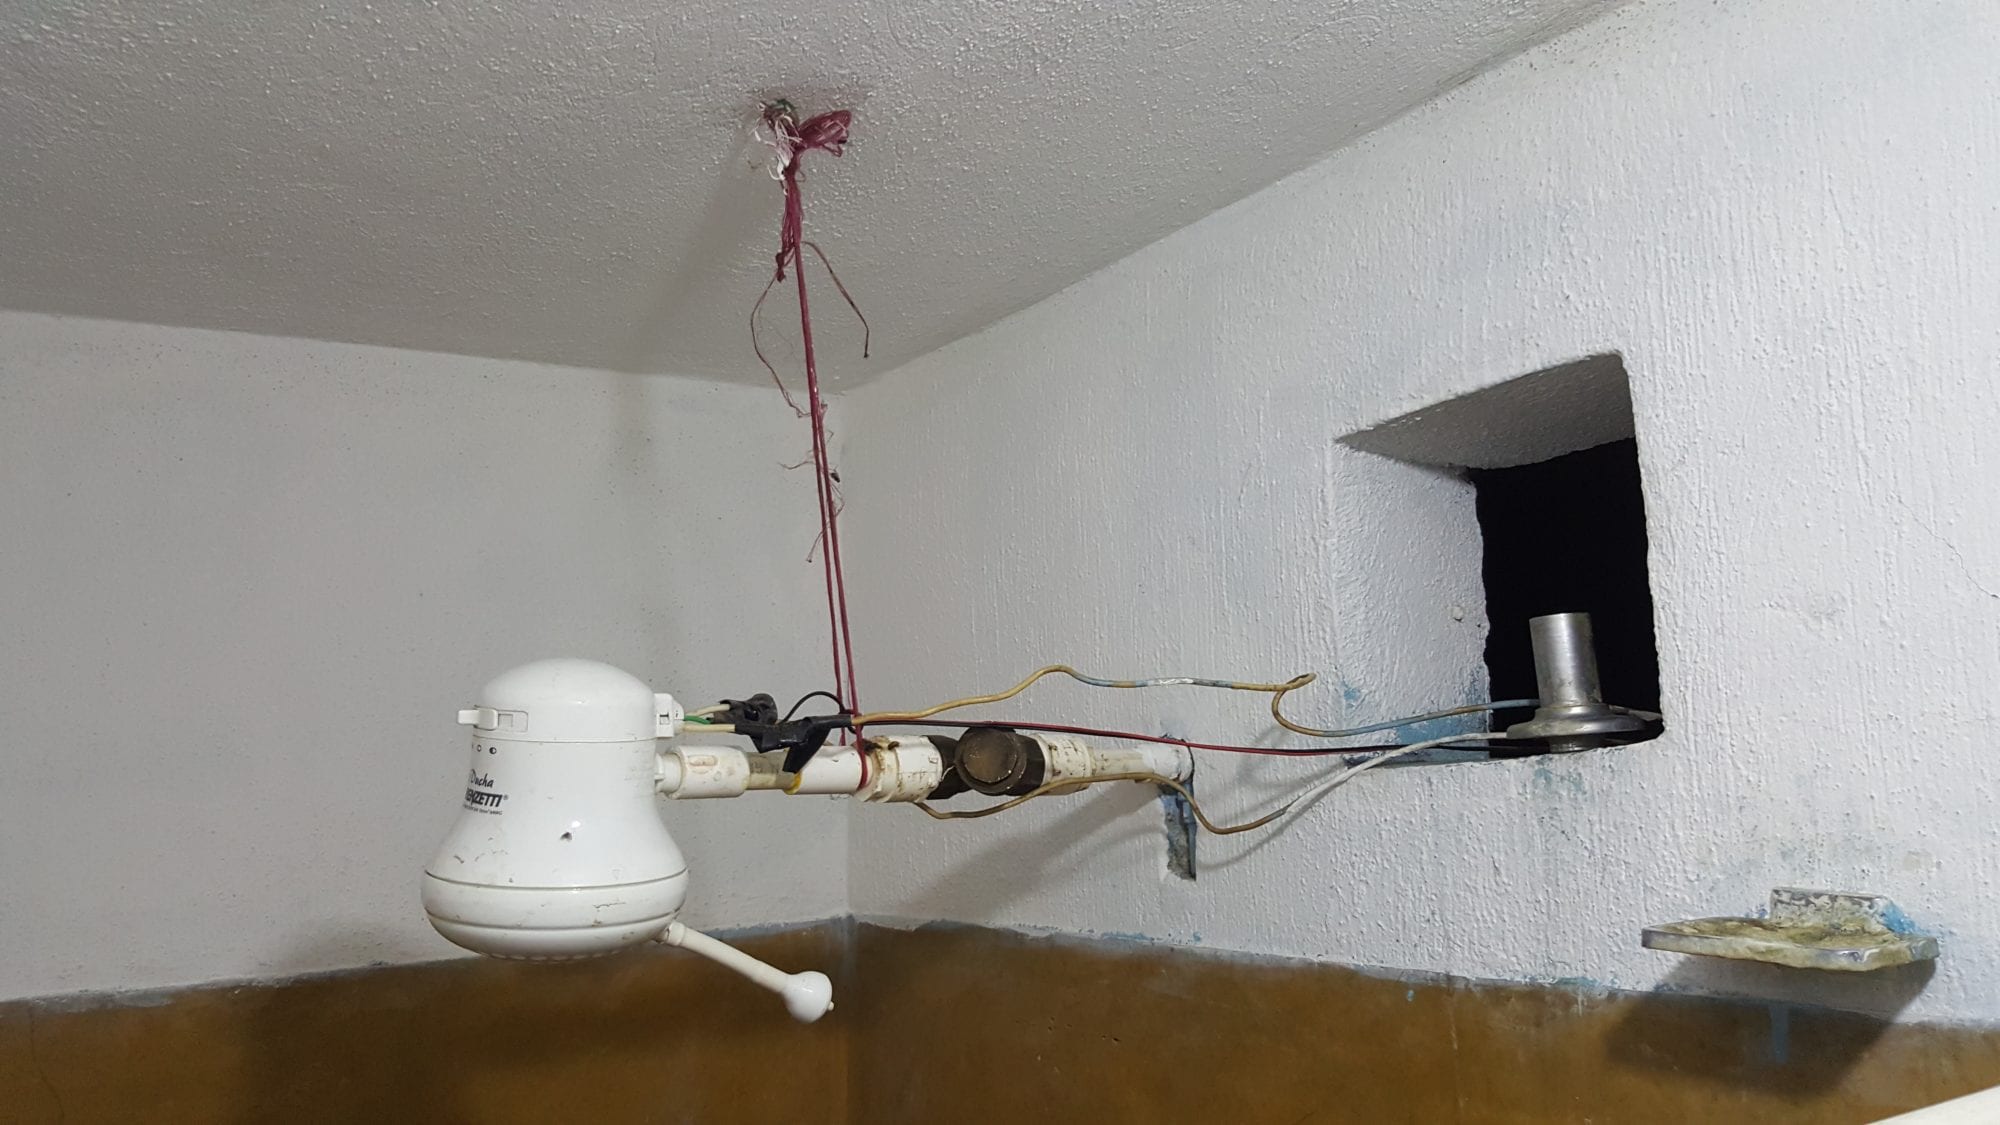 It's pretty hot in Central America, so not all places have hot water. Of the places that do, sometimes you will get these little shower heads that heat the water as it comes out. Look at those exposed wires! Jane and I refer to these as “Suicide Showers.” These are often jankie, but this one at our hostel was particularly photo-worthy. I’ve been zapped more than once when reaching up to adjust these mid shower.